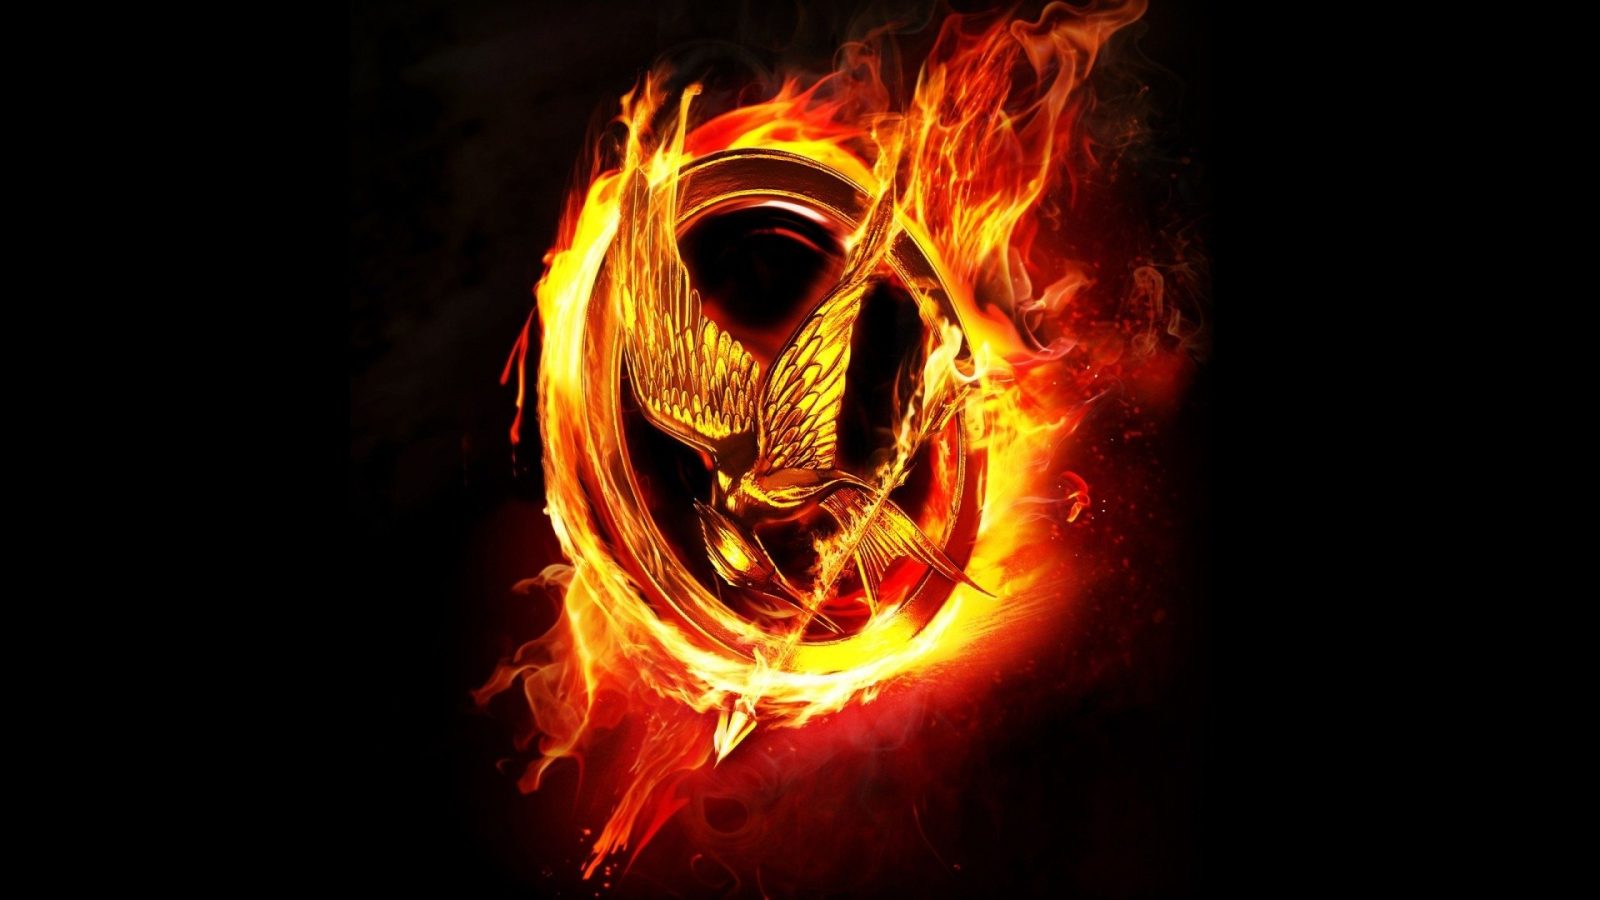 Hunger Games spin-off uscita